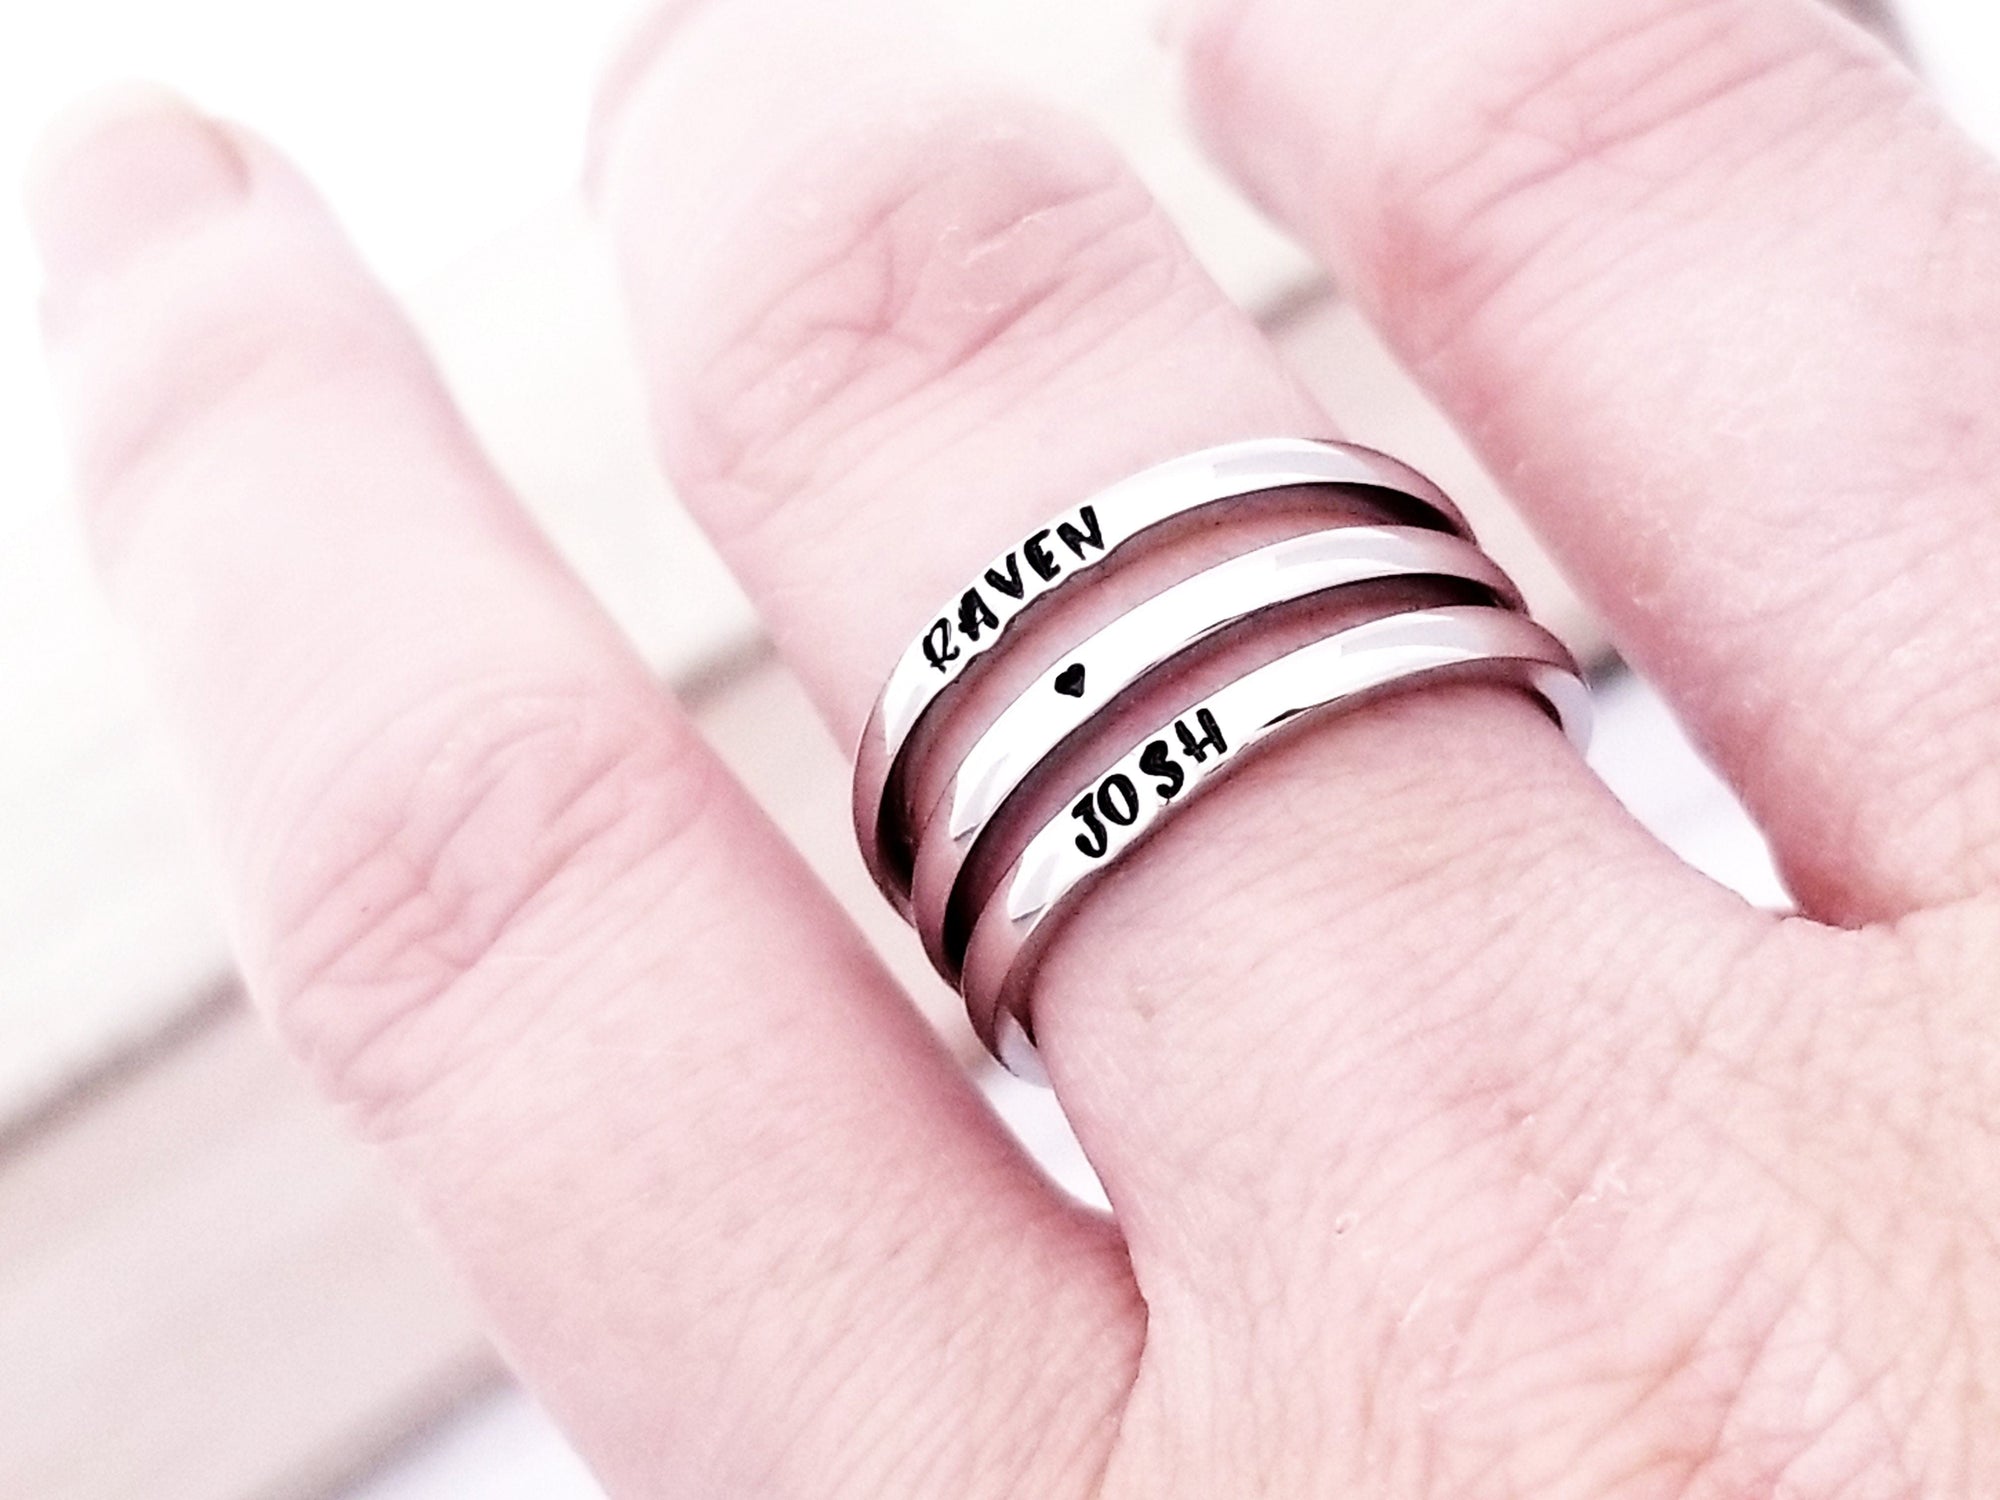 Tiny Roman Numeral Rings, Custom Hand Stamped Rings, Personalized Gift, Eternity rings, Stainless Steel